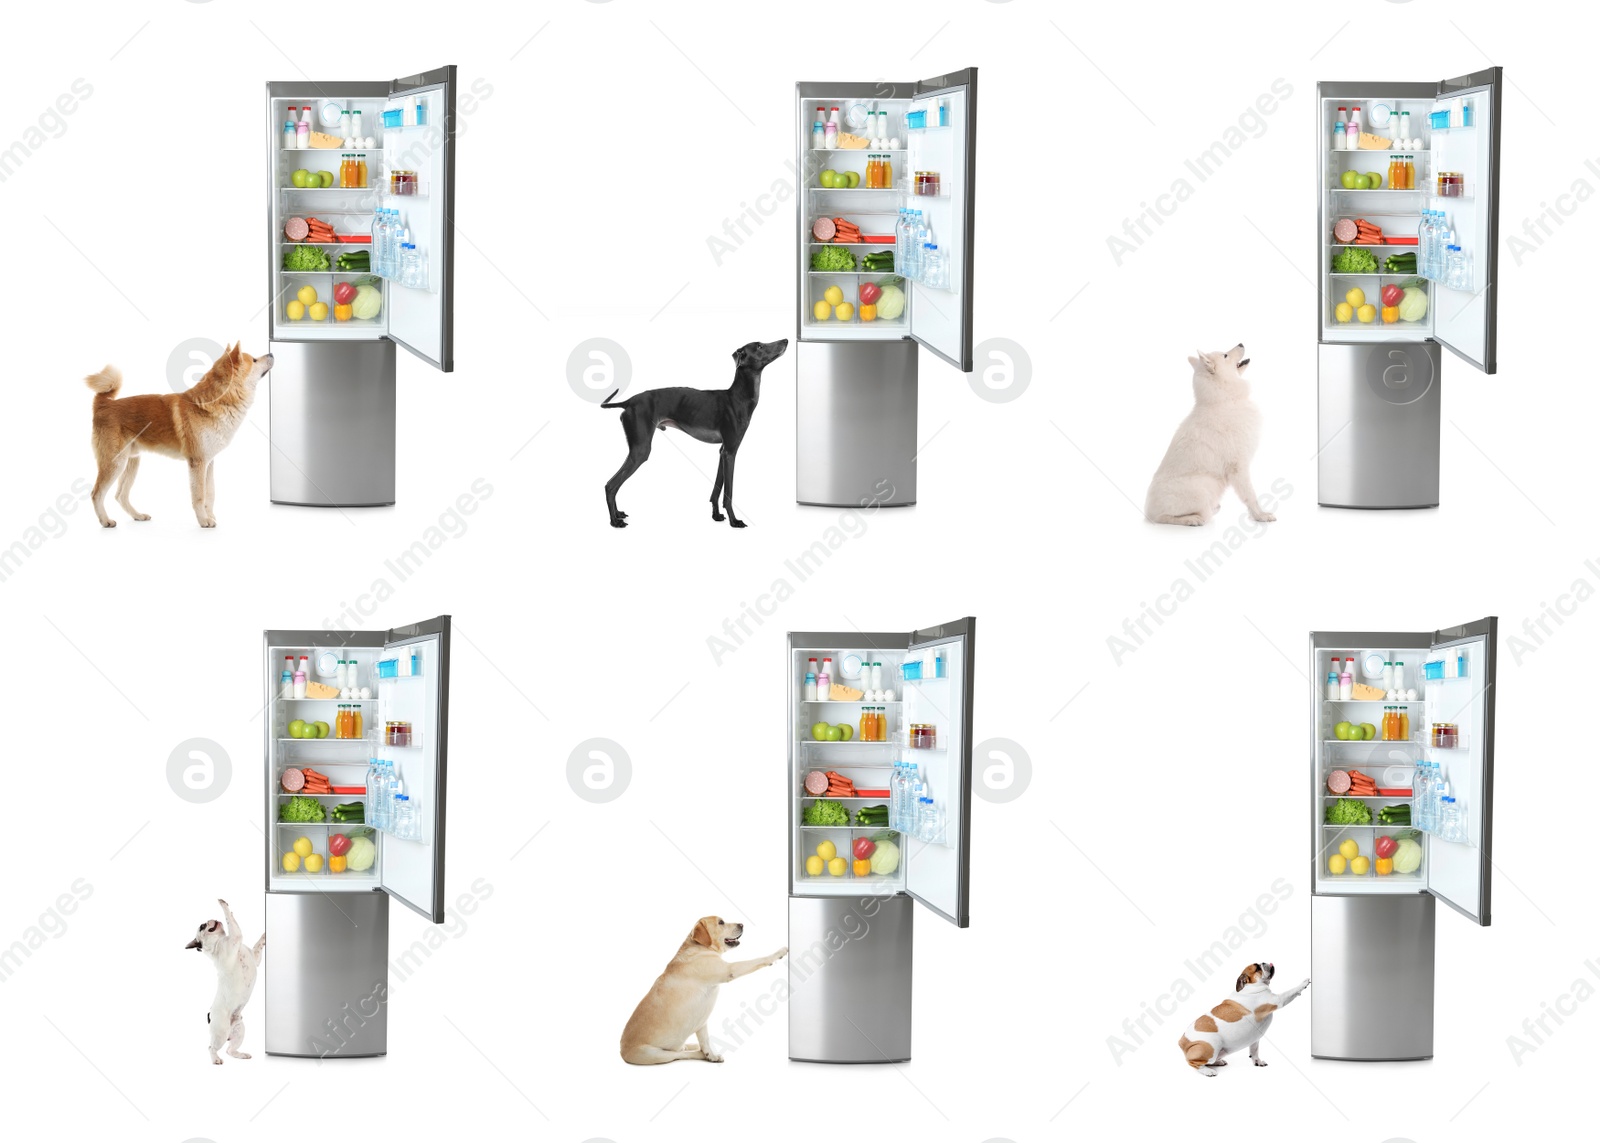 Image of Cute dogs near open refrigerators on white background, collage